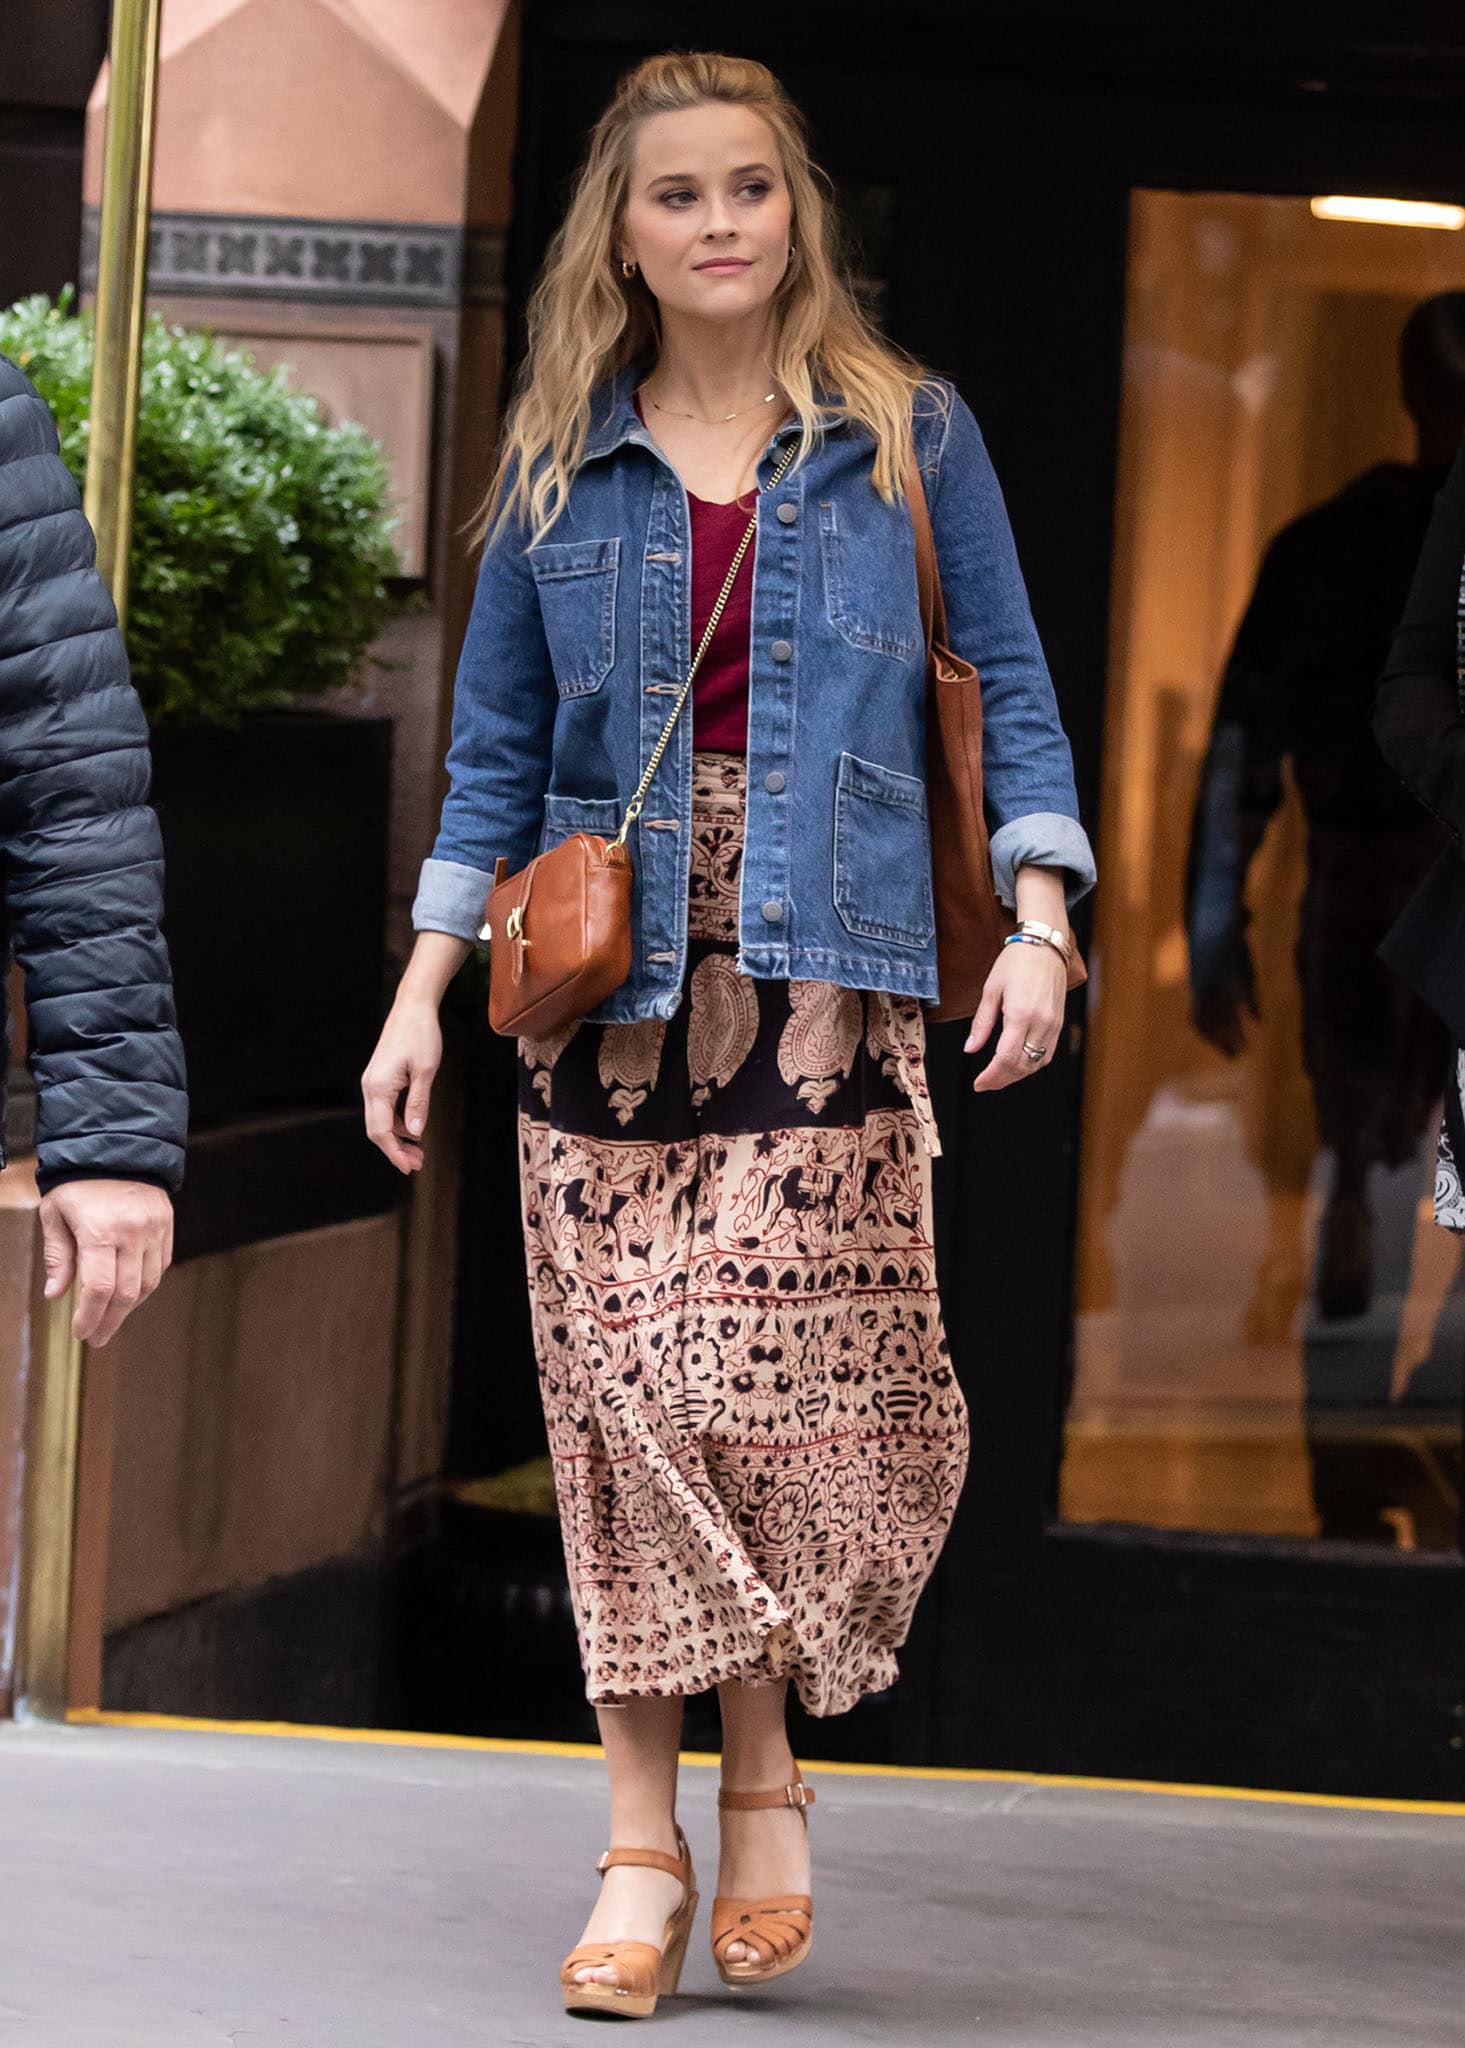 Reese Witherspoon opts for an autumnal look in a printed maxi skirt and burgundy tee